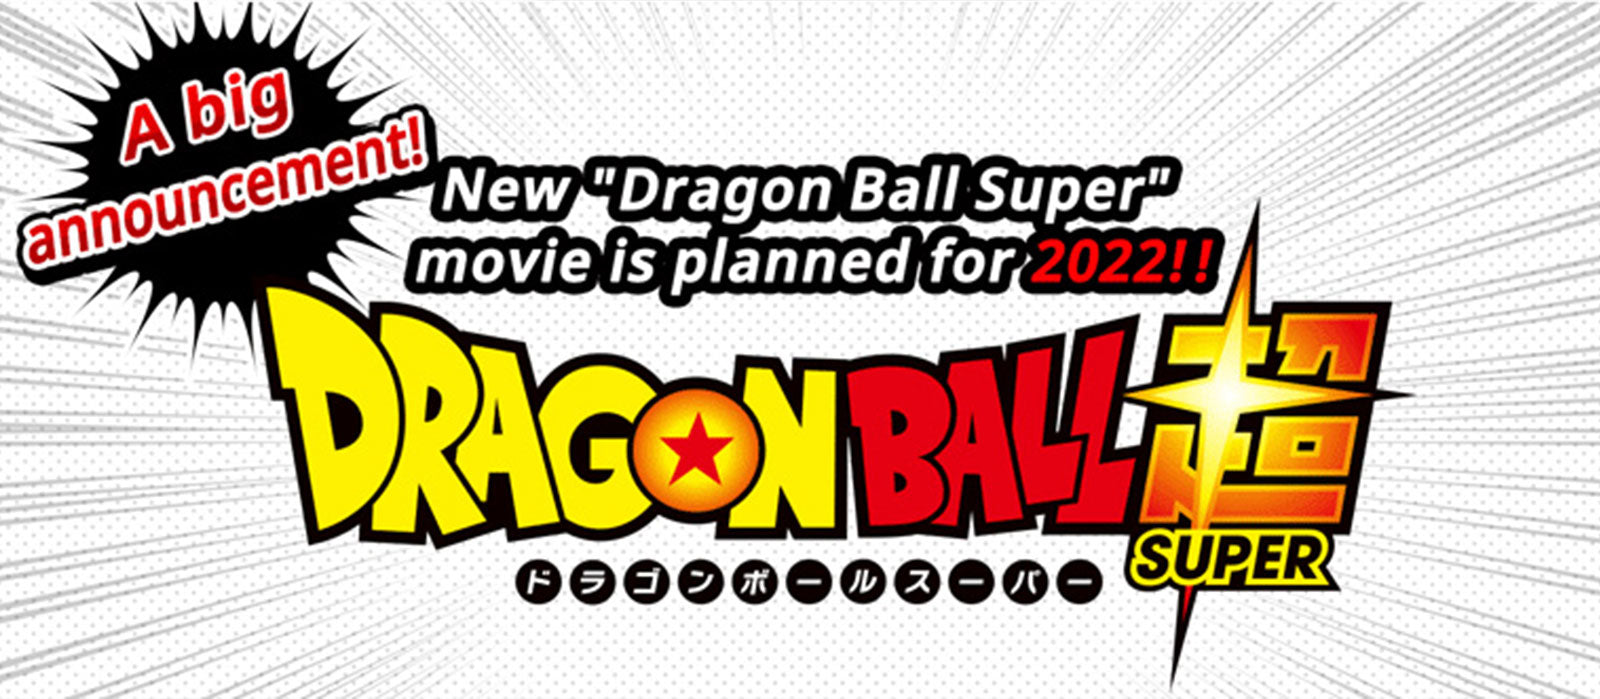 New "Dragon Ball Super" movie is planned for 2022!